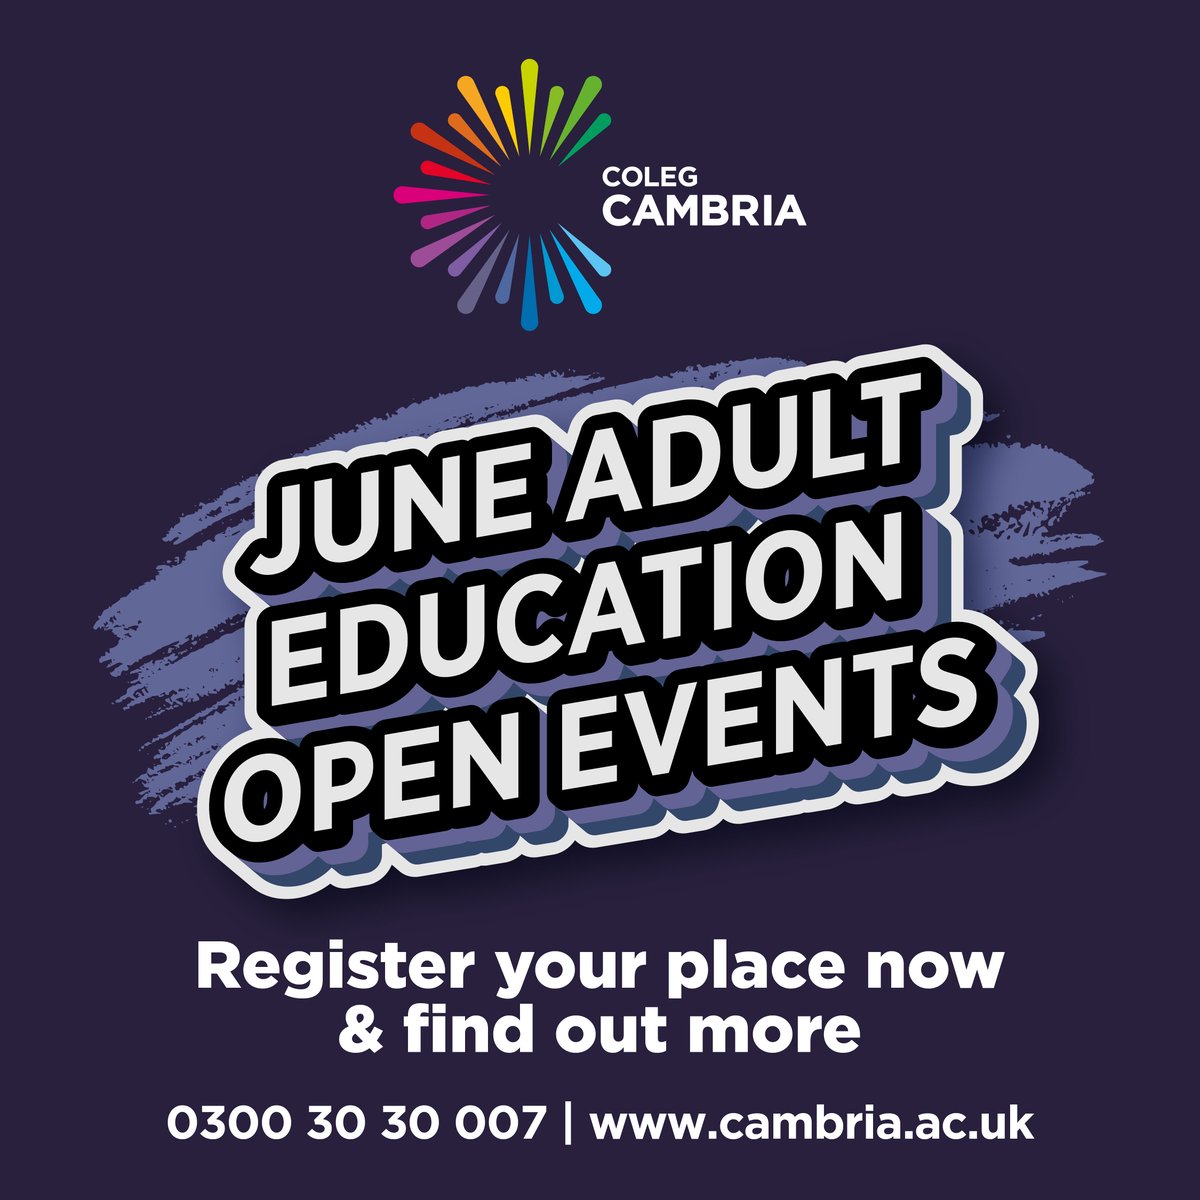 Find the perfect part time course and start a new hobby or progress your career alongside your current job! Come along to our Adult Education Open Events this June, find out more and register here bit.ly/3RsEq8q #LearningAtWorkWeek